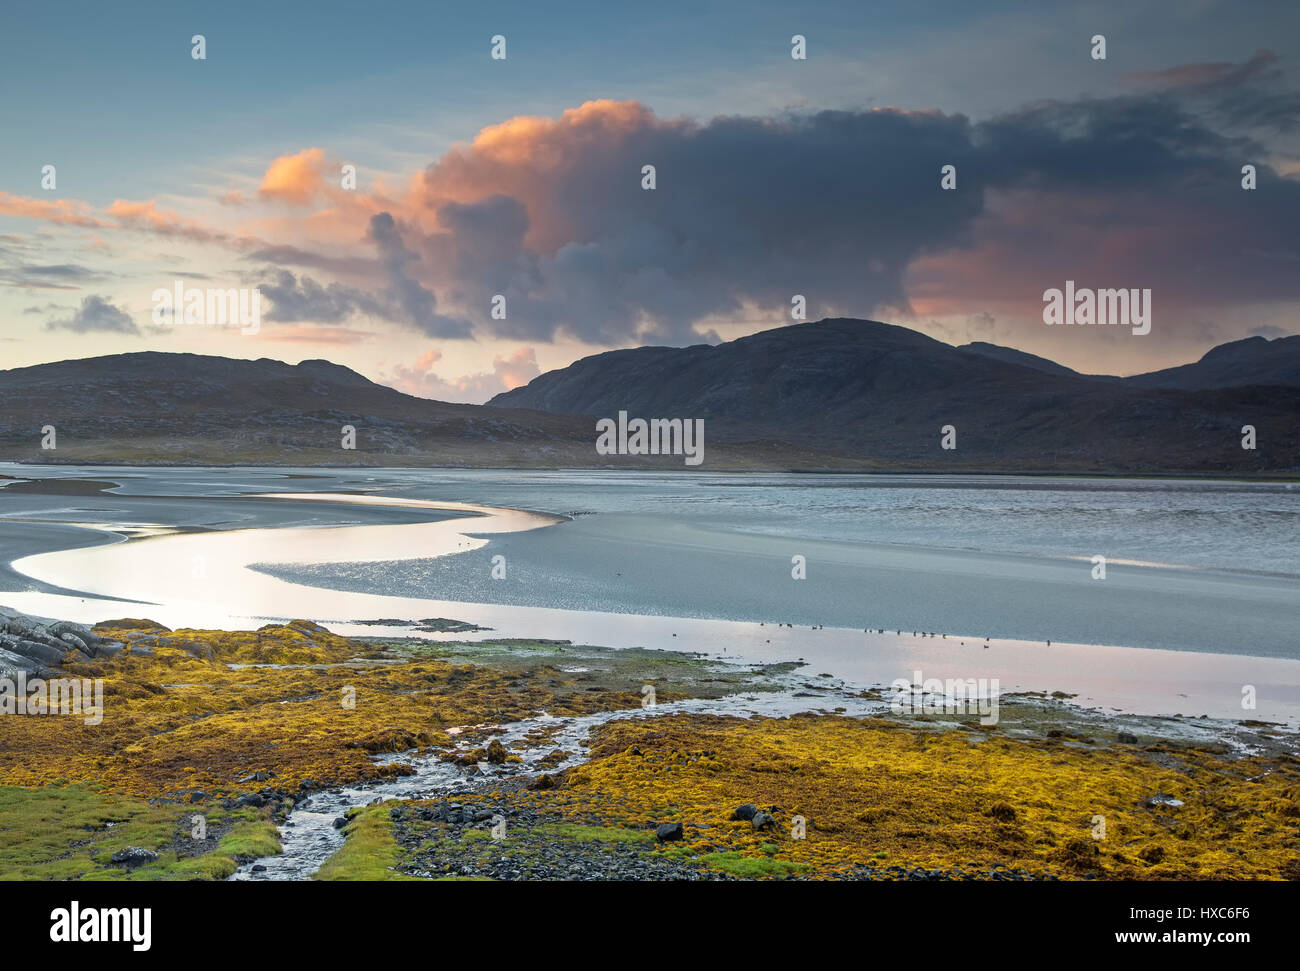 Clouds over tranquil mountains and ocean, Luskentyre Beach, Harris, Outer Hebrides Stock Photo